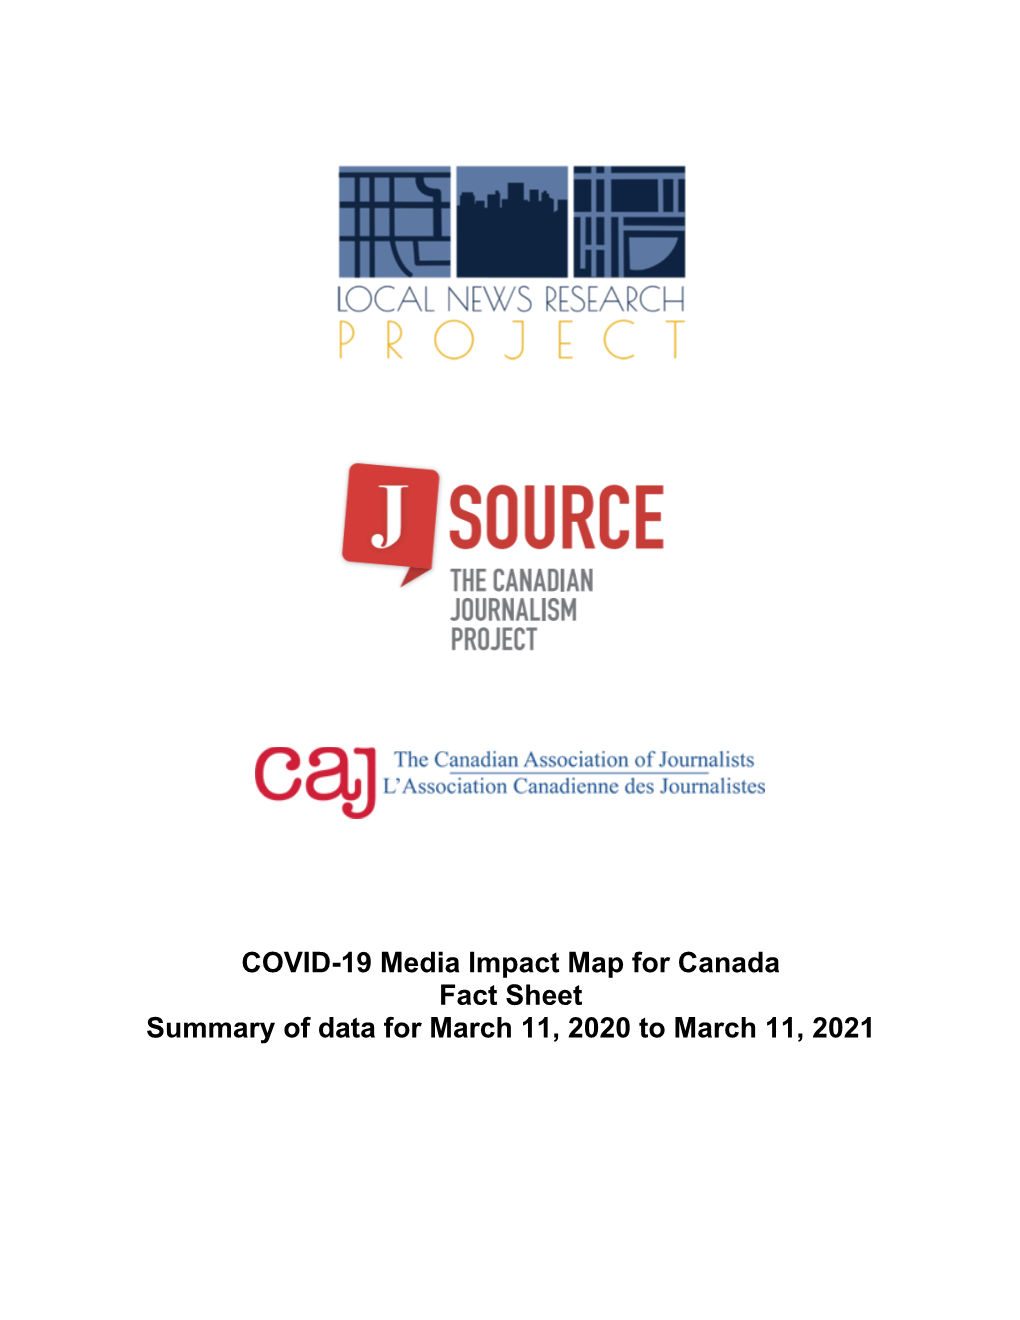 COVID-19 Media Impact Map for Canada Fact Sheet Summary of Data for March 11, 2020 to March 11, 2021 ABOUT THIS PROJECT